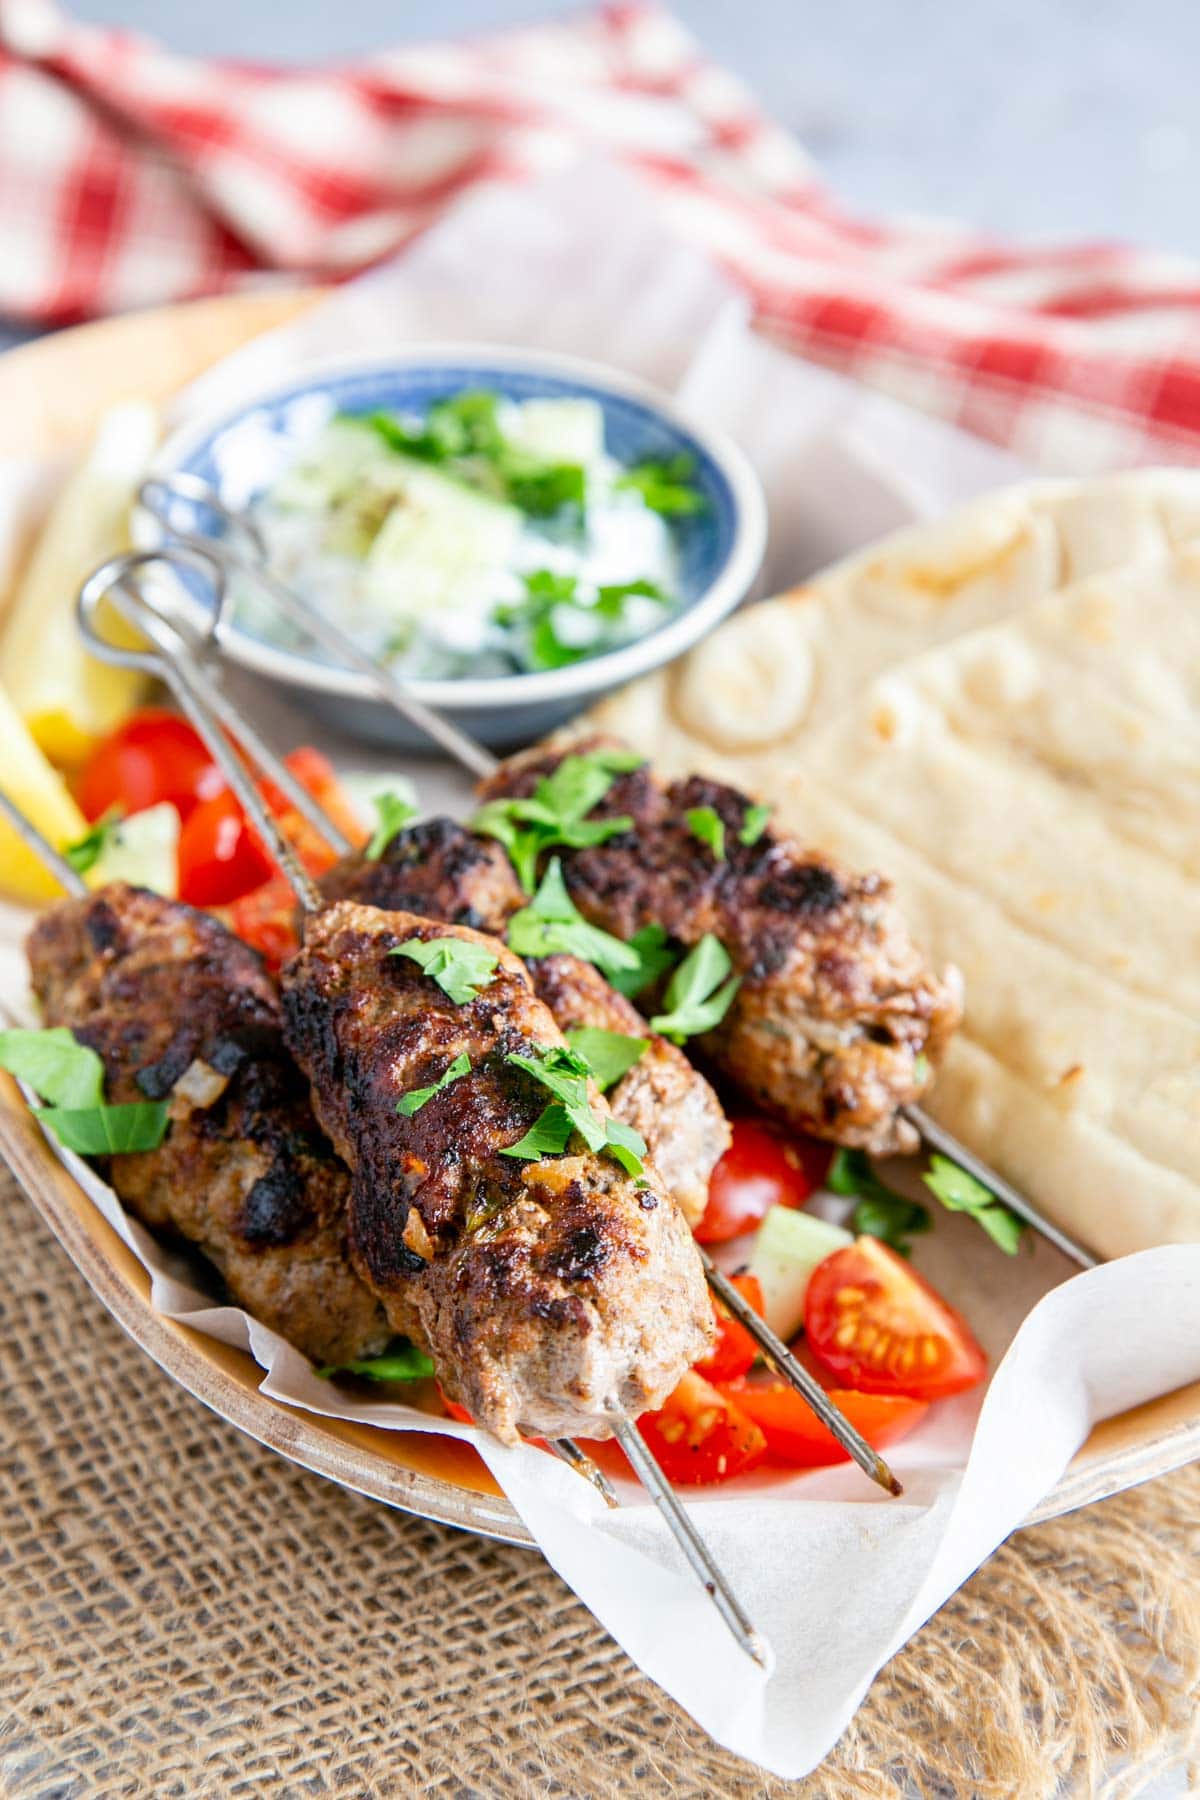 Succulent and spicy lamb koftas served on skewers with salad, dips and flatbreads.